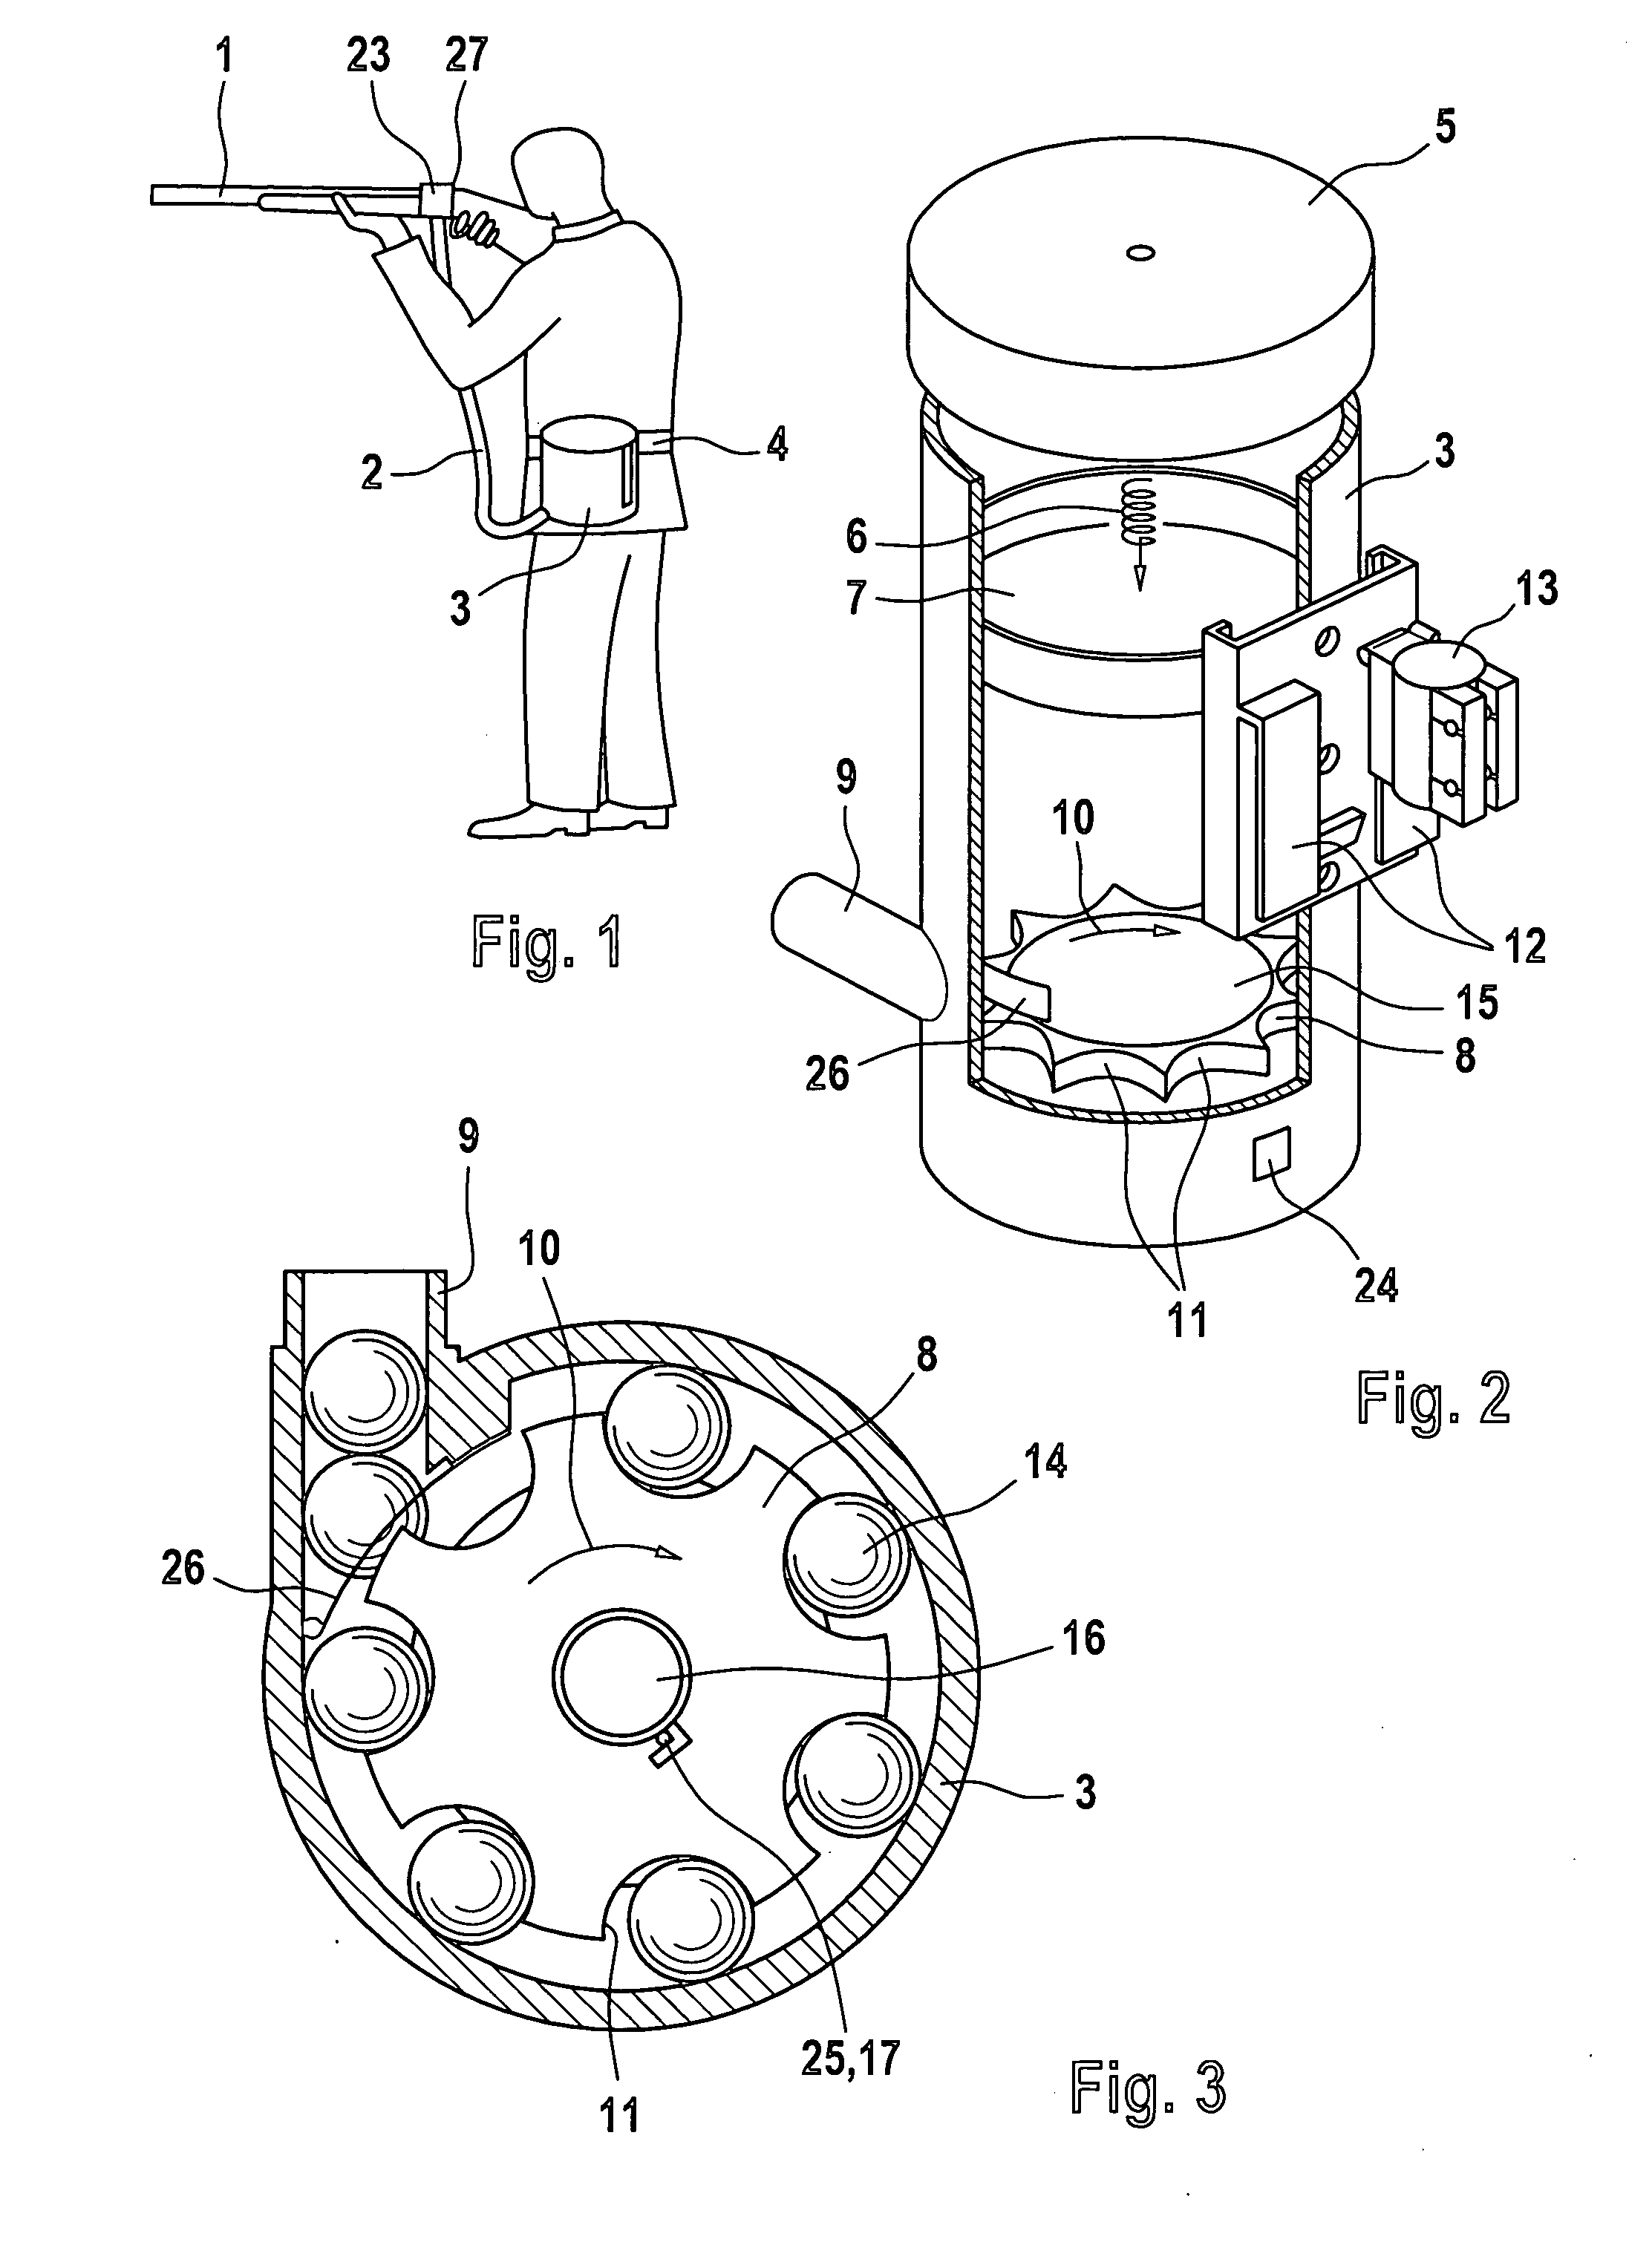 Device for storing projectile balls and feeding them into the projectile chamber of a gun